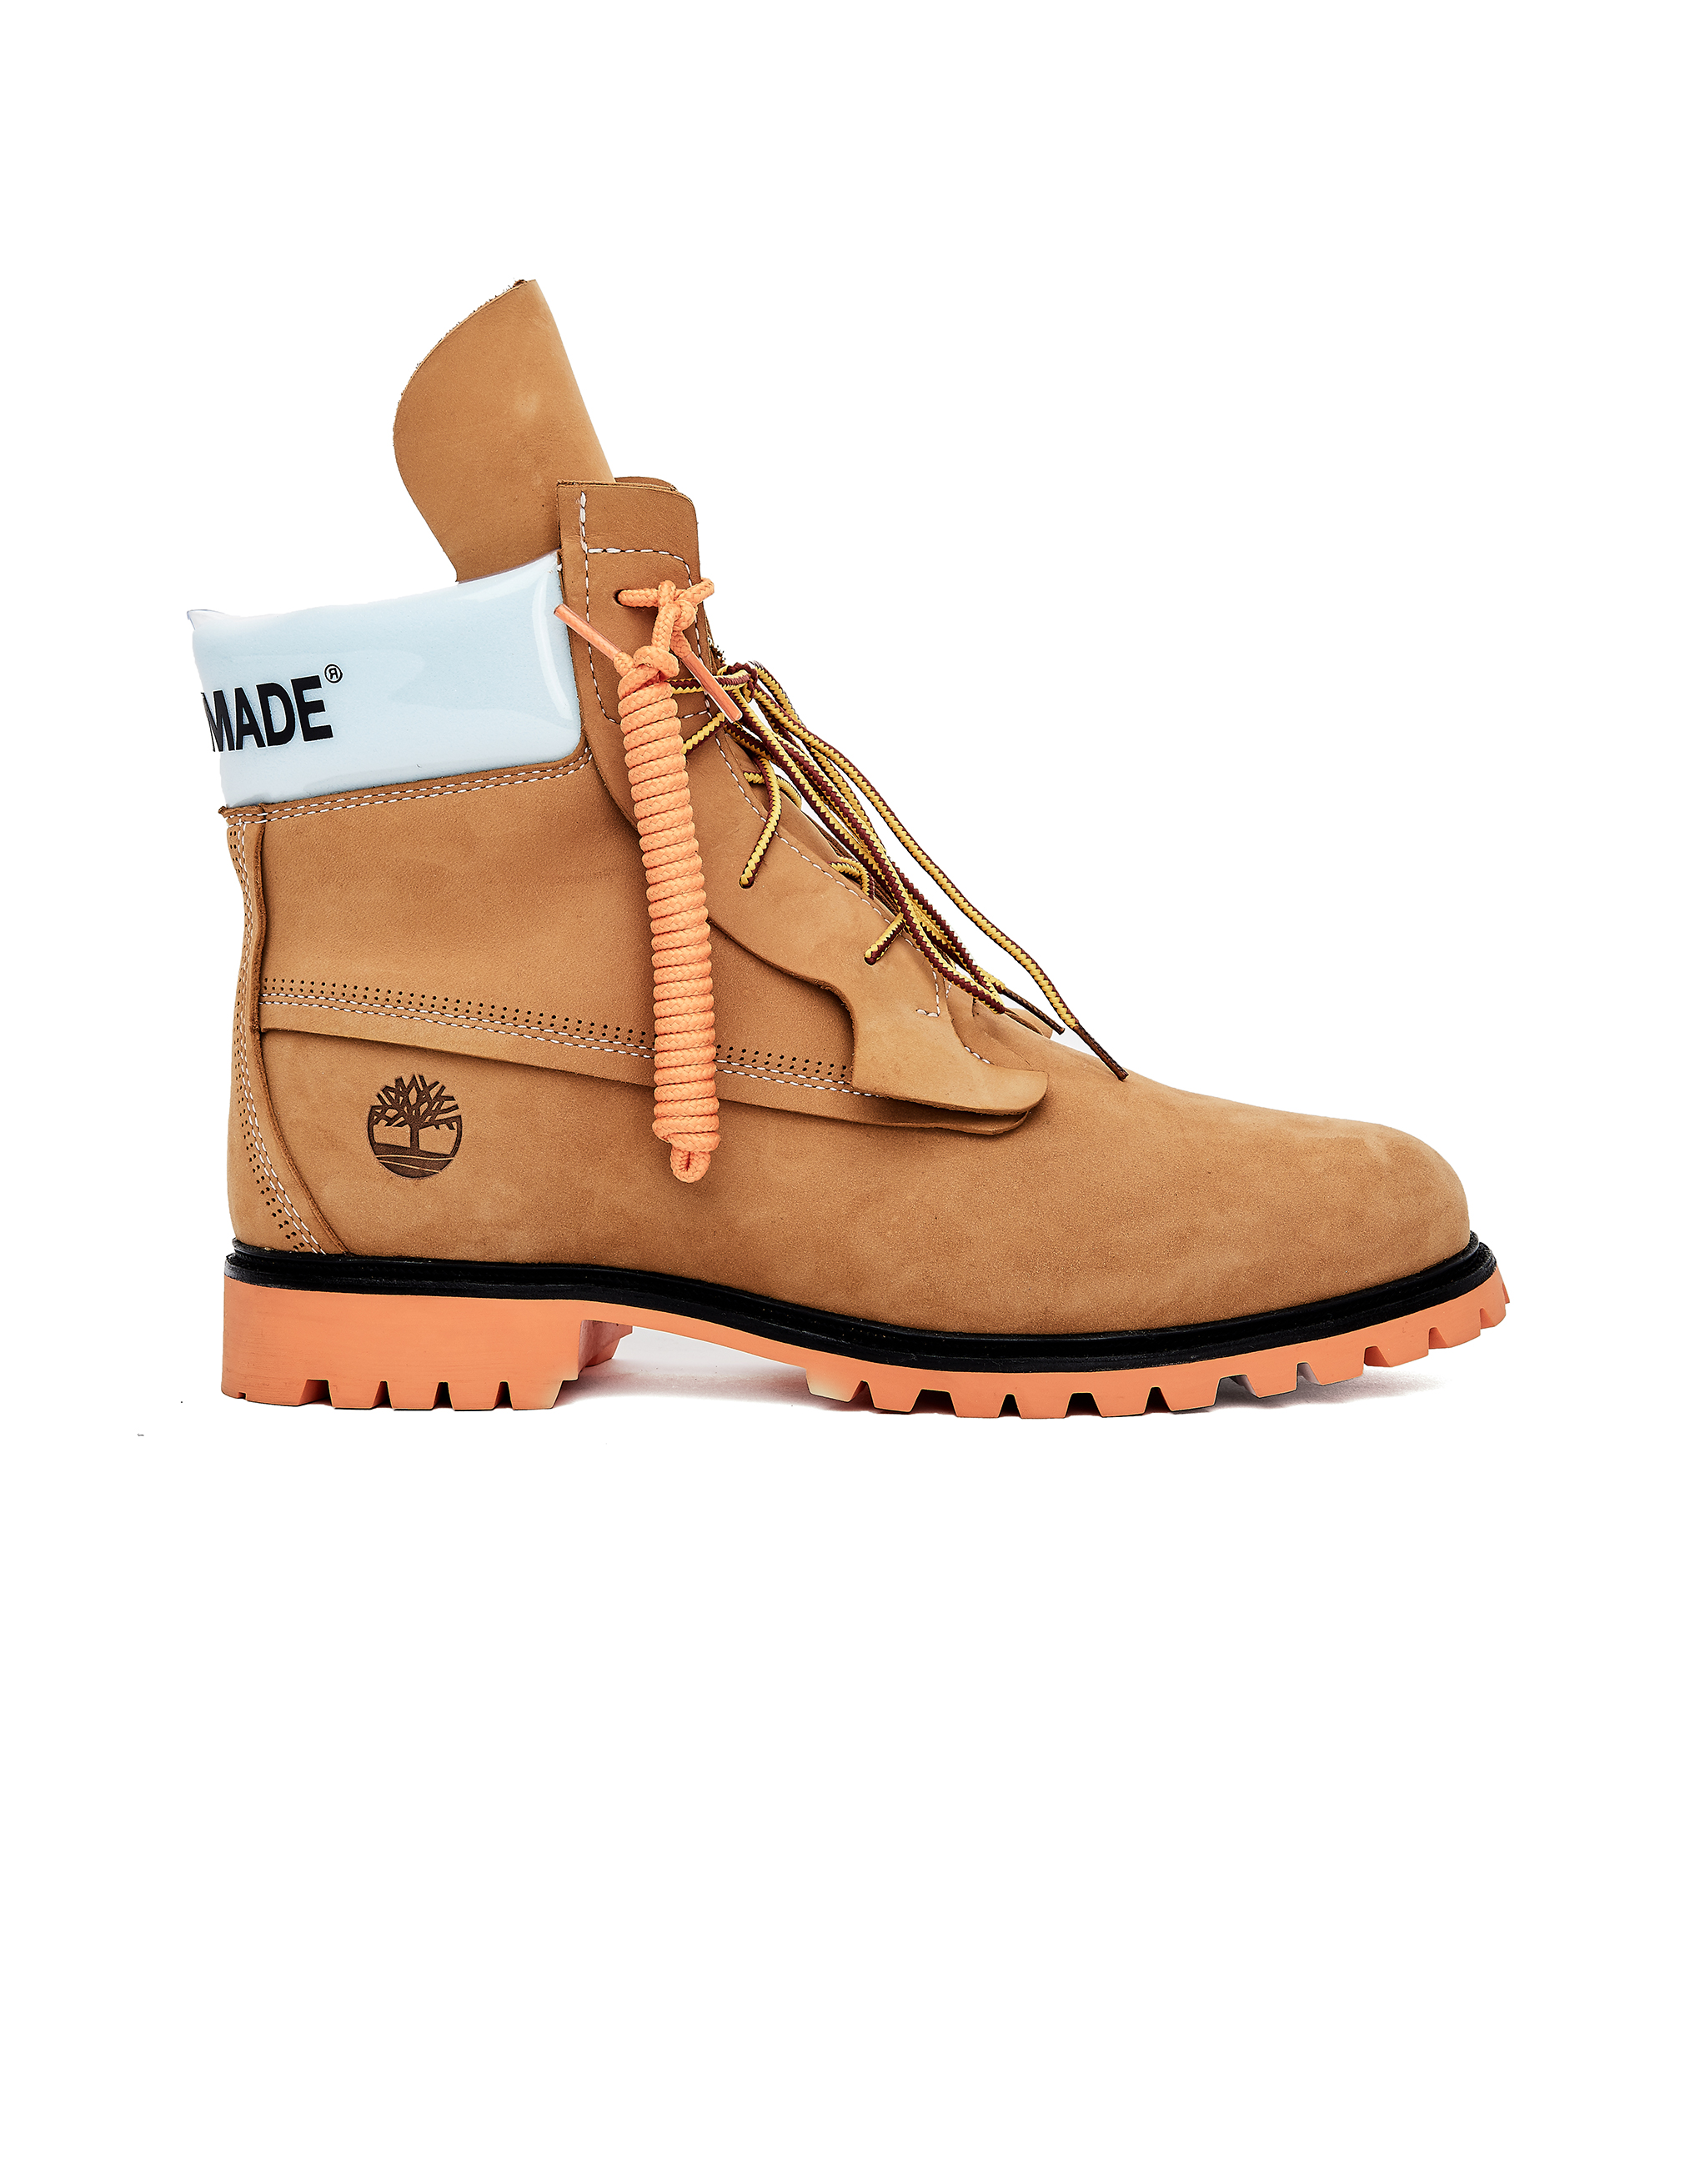 Readymade x Timberland Worker Boots 